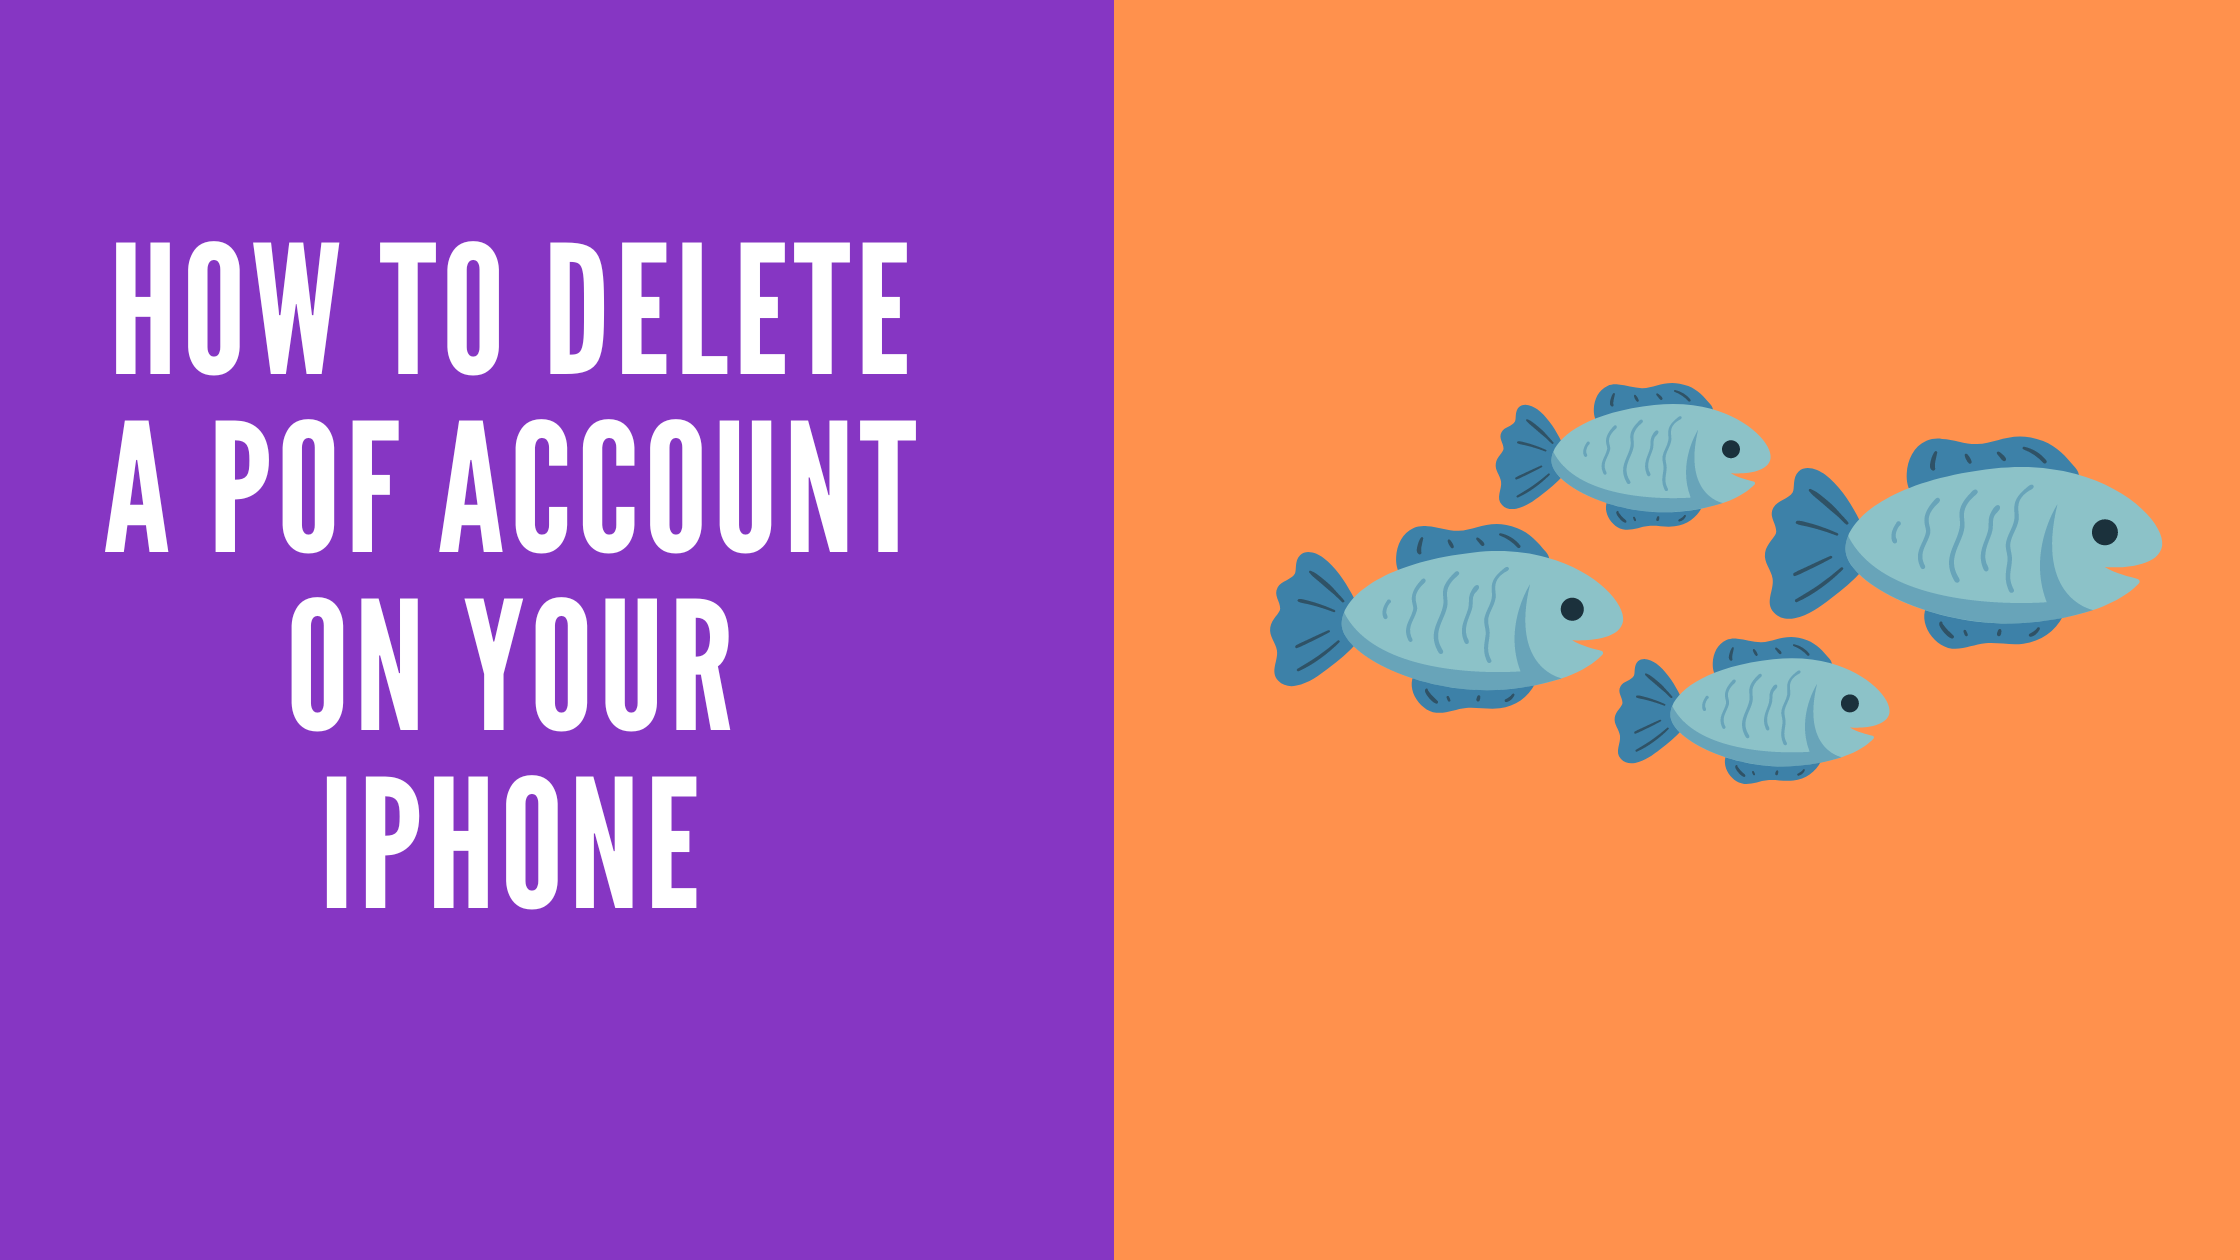 How to Delete a POF Account on Your iPhone